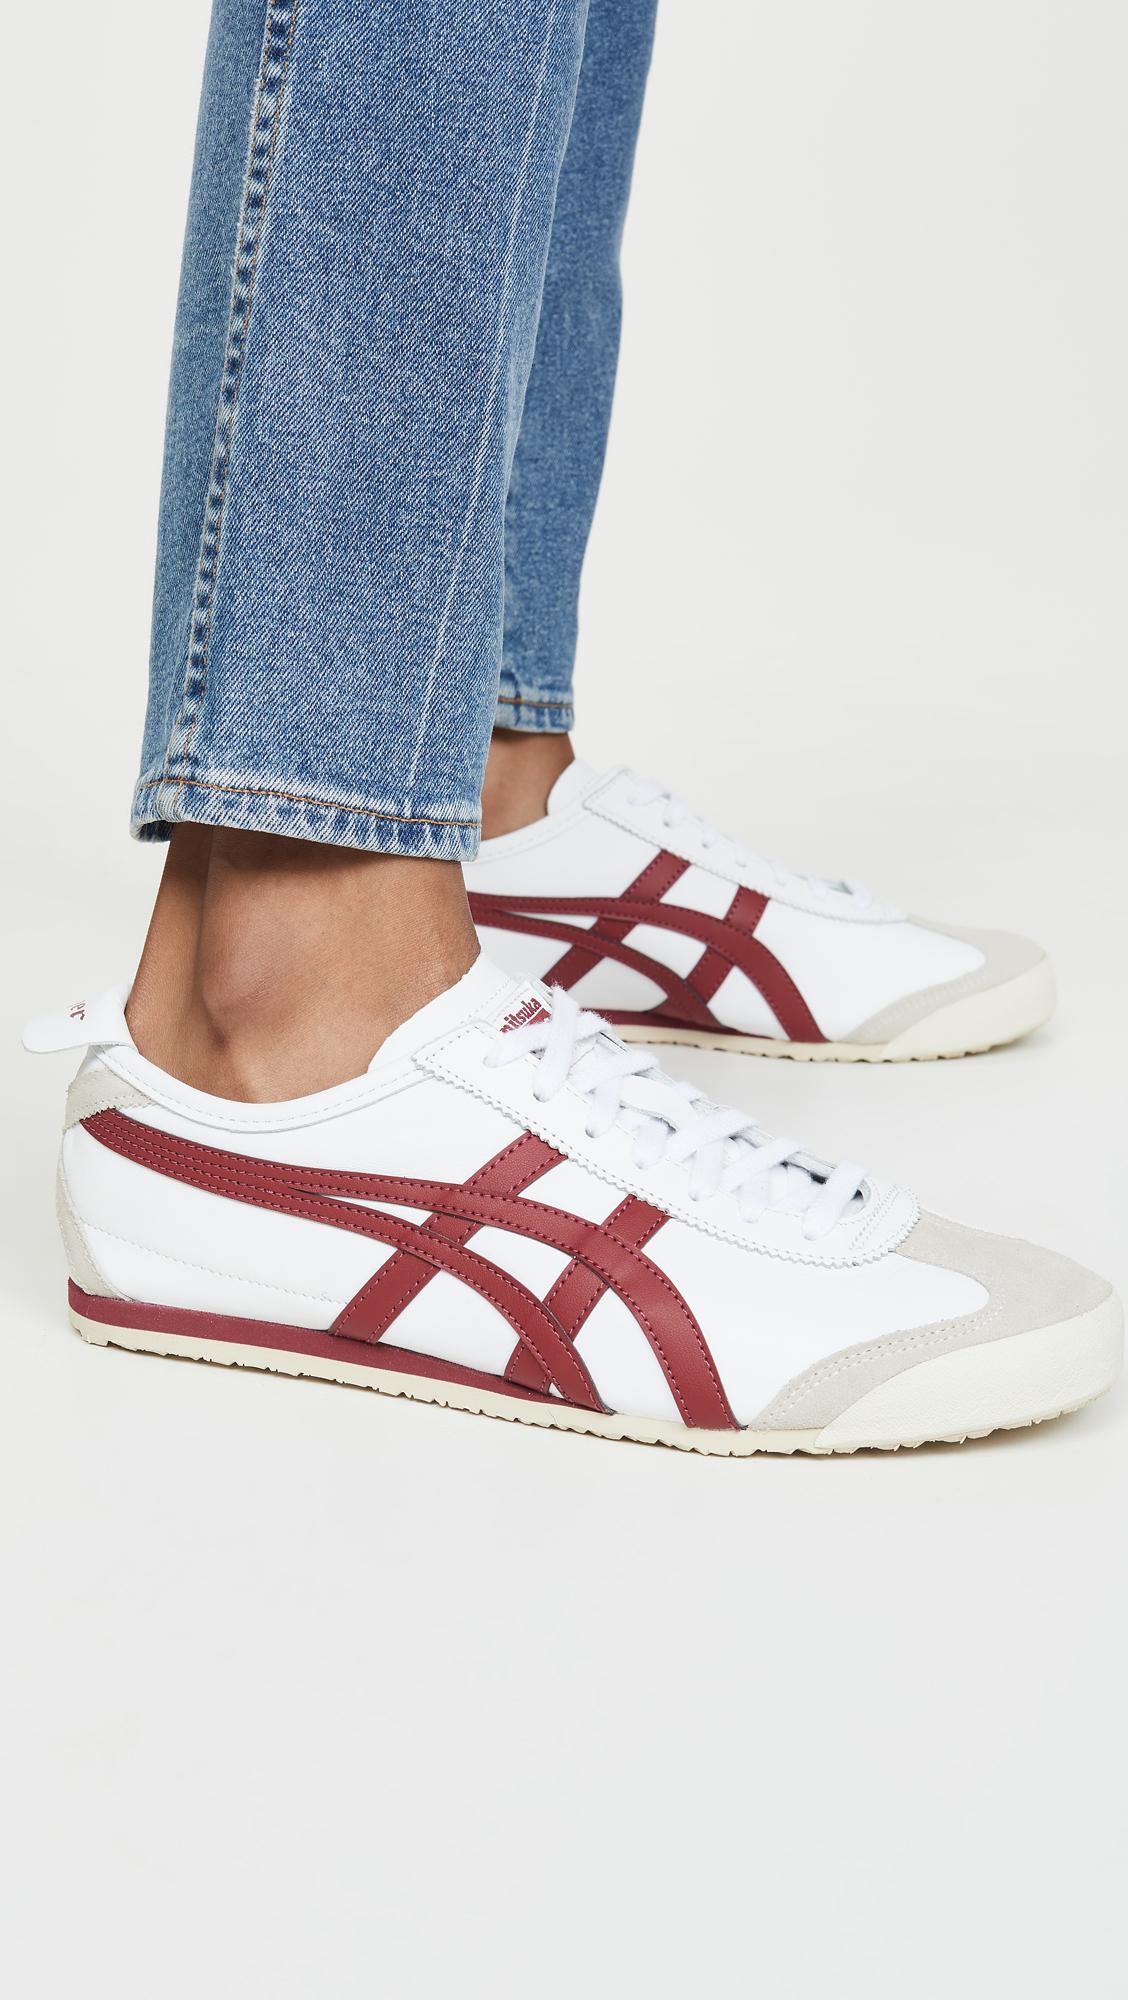 ONITSUKA TIGER MEXICO 66 (WHITE/BURGUNDY) REVIEW And ON FEET Sneakers ...